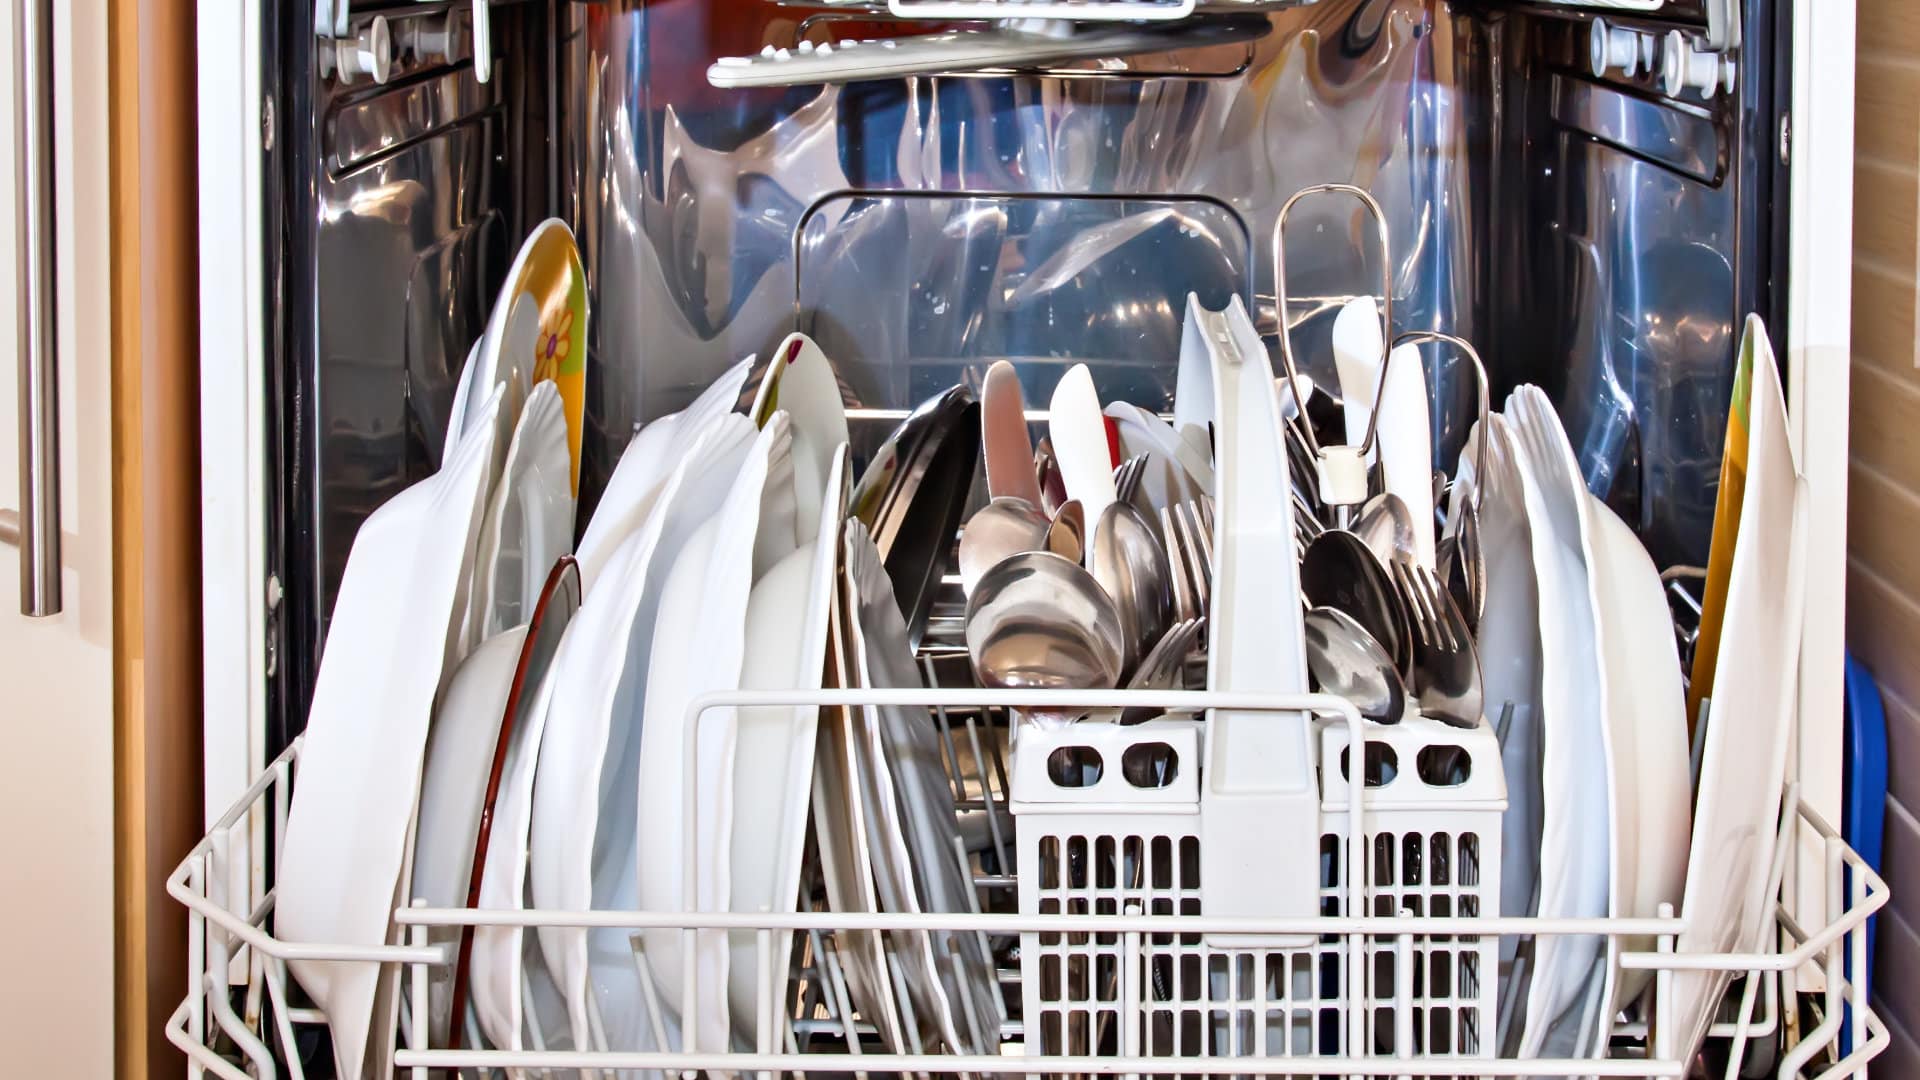 Featured image for “How to Clean Your Dishwasher”